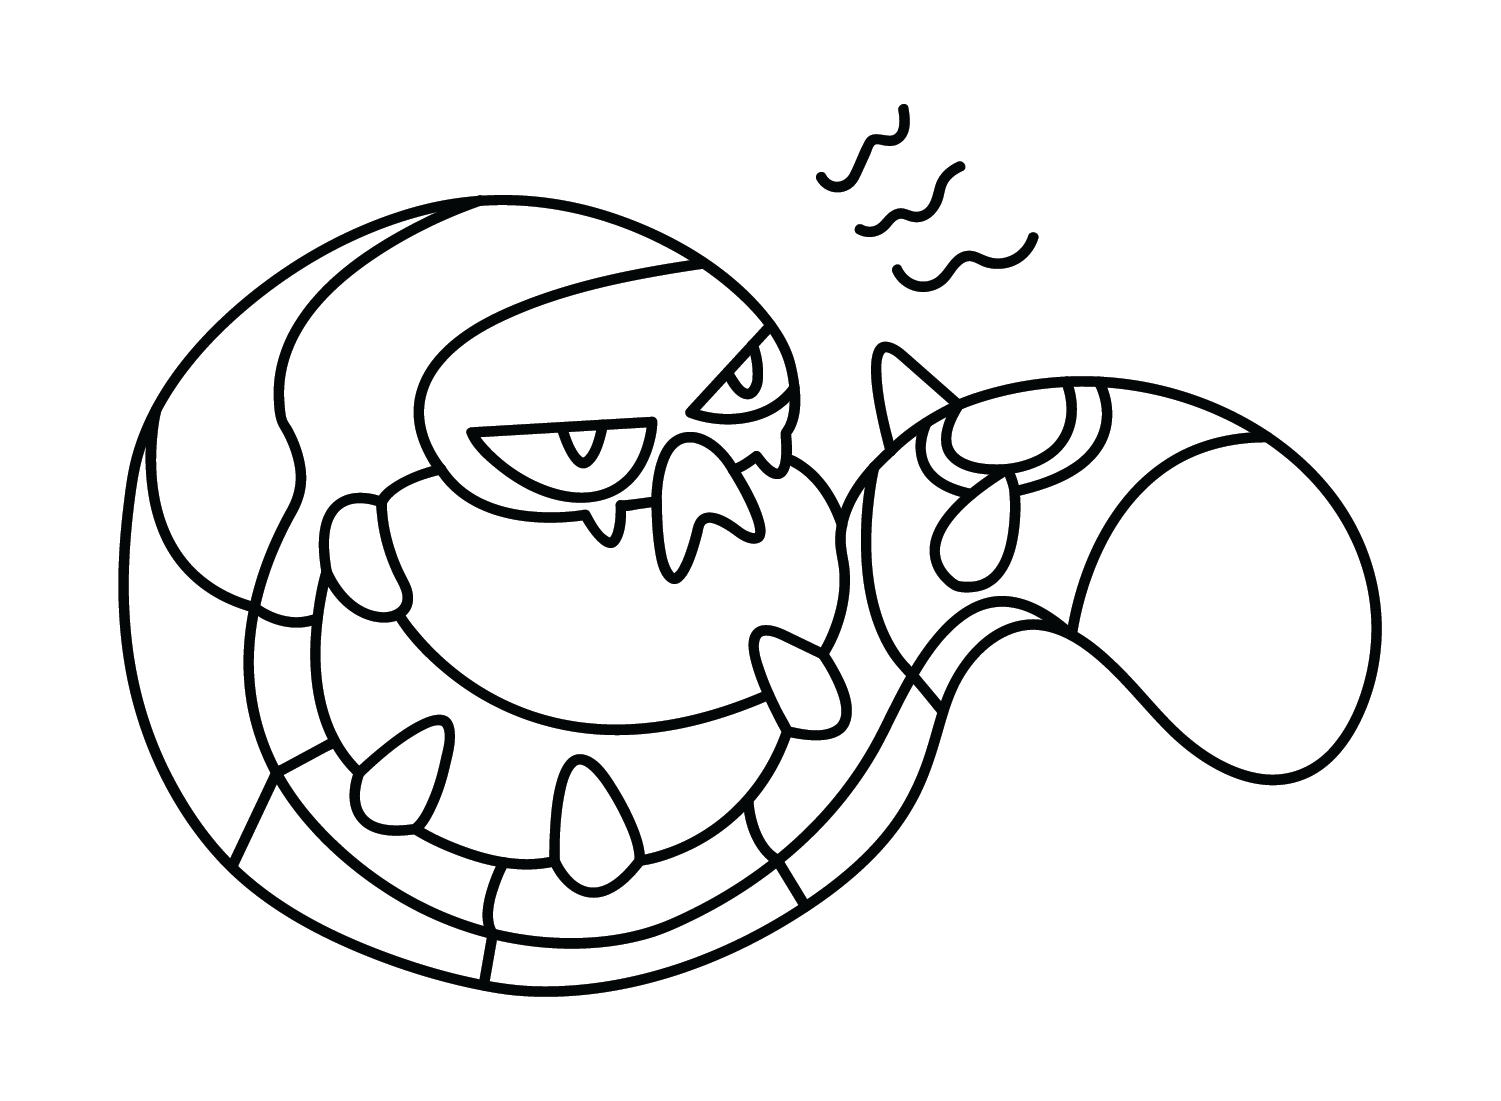 The Sizzlipede Coloring Page